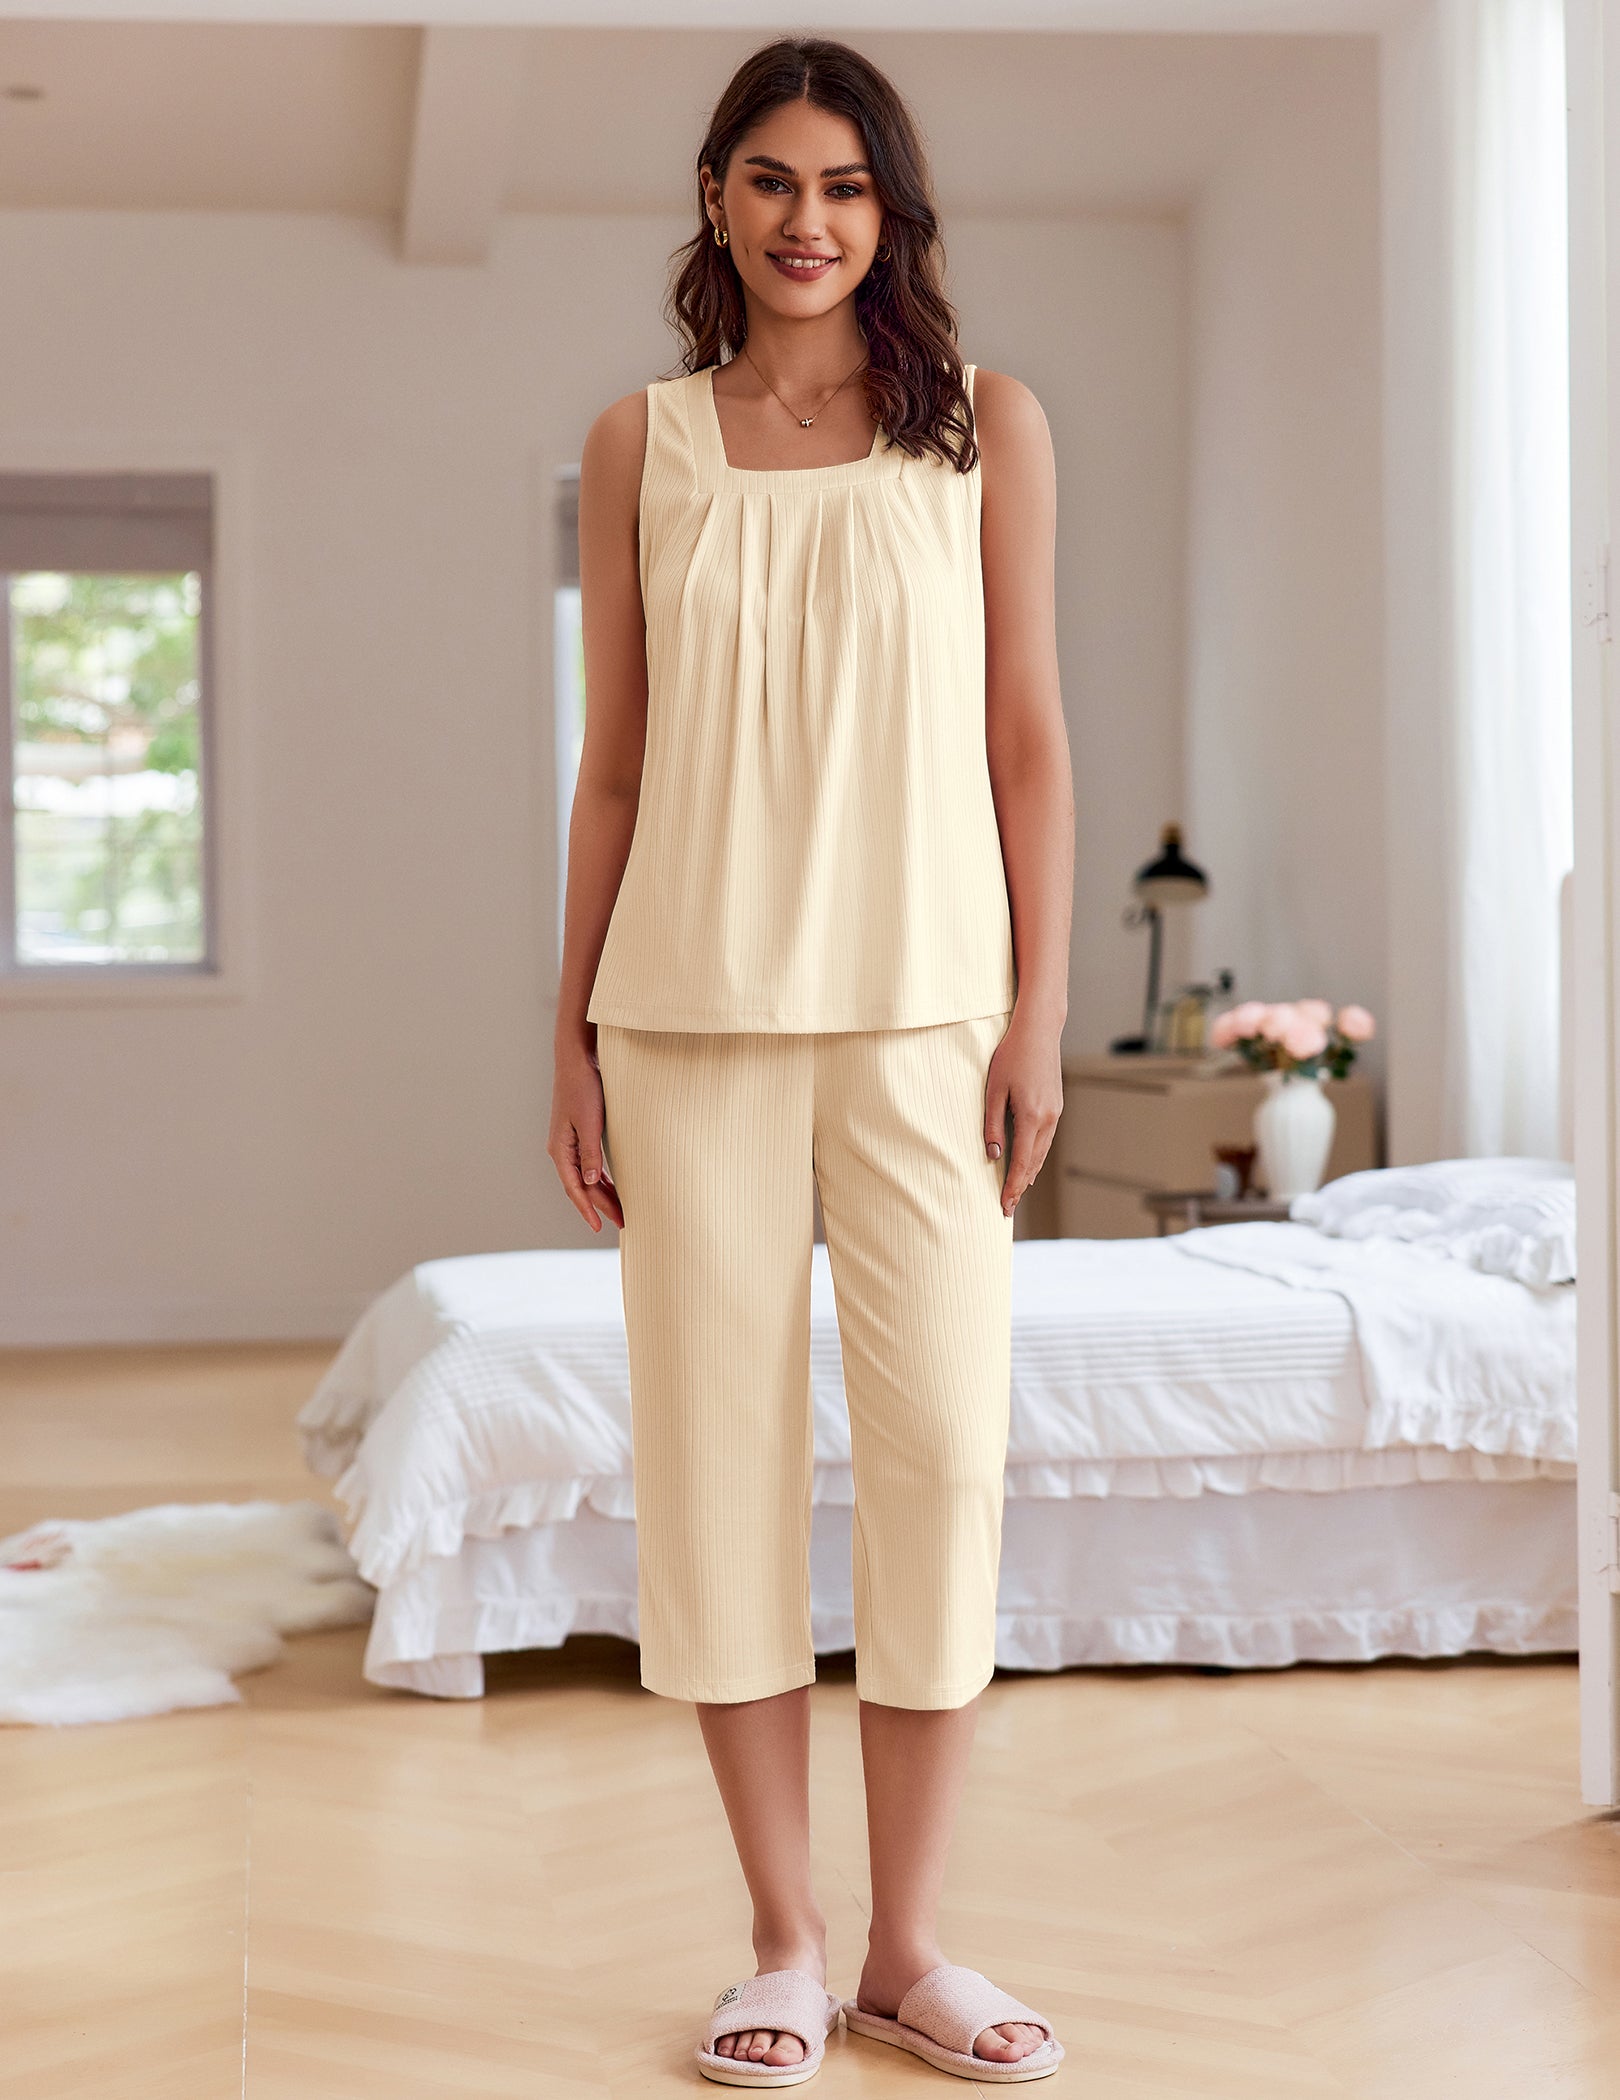 Cozy Stretch Sleeveless Top and Pants Set